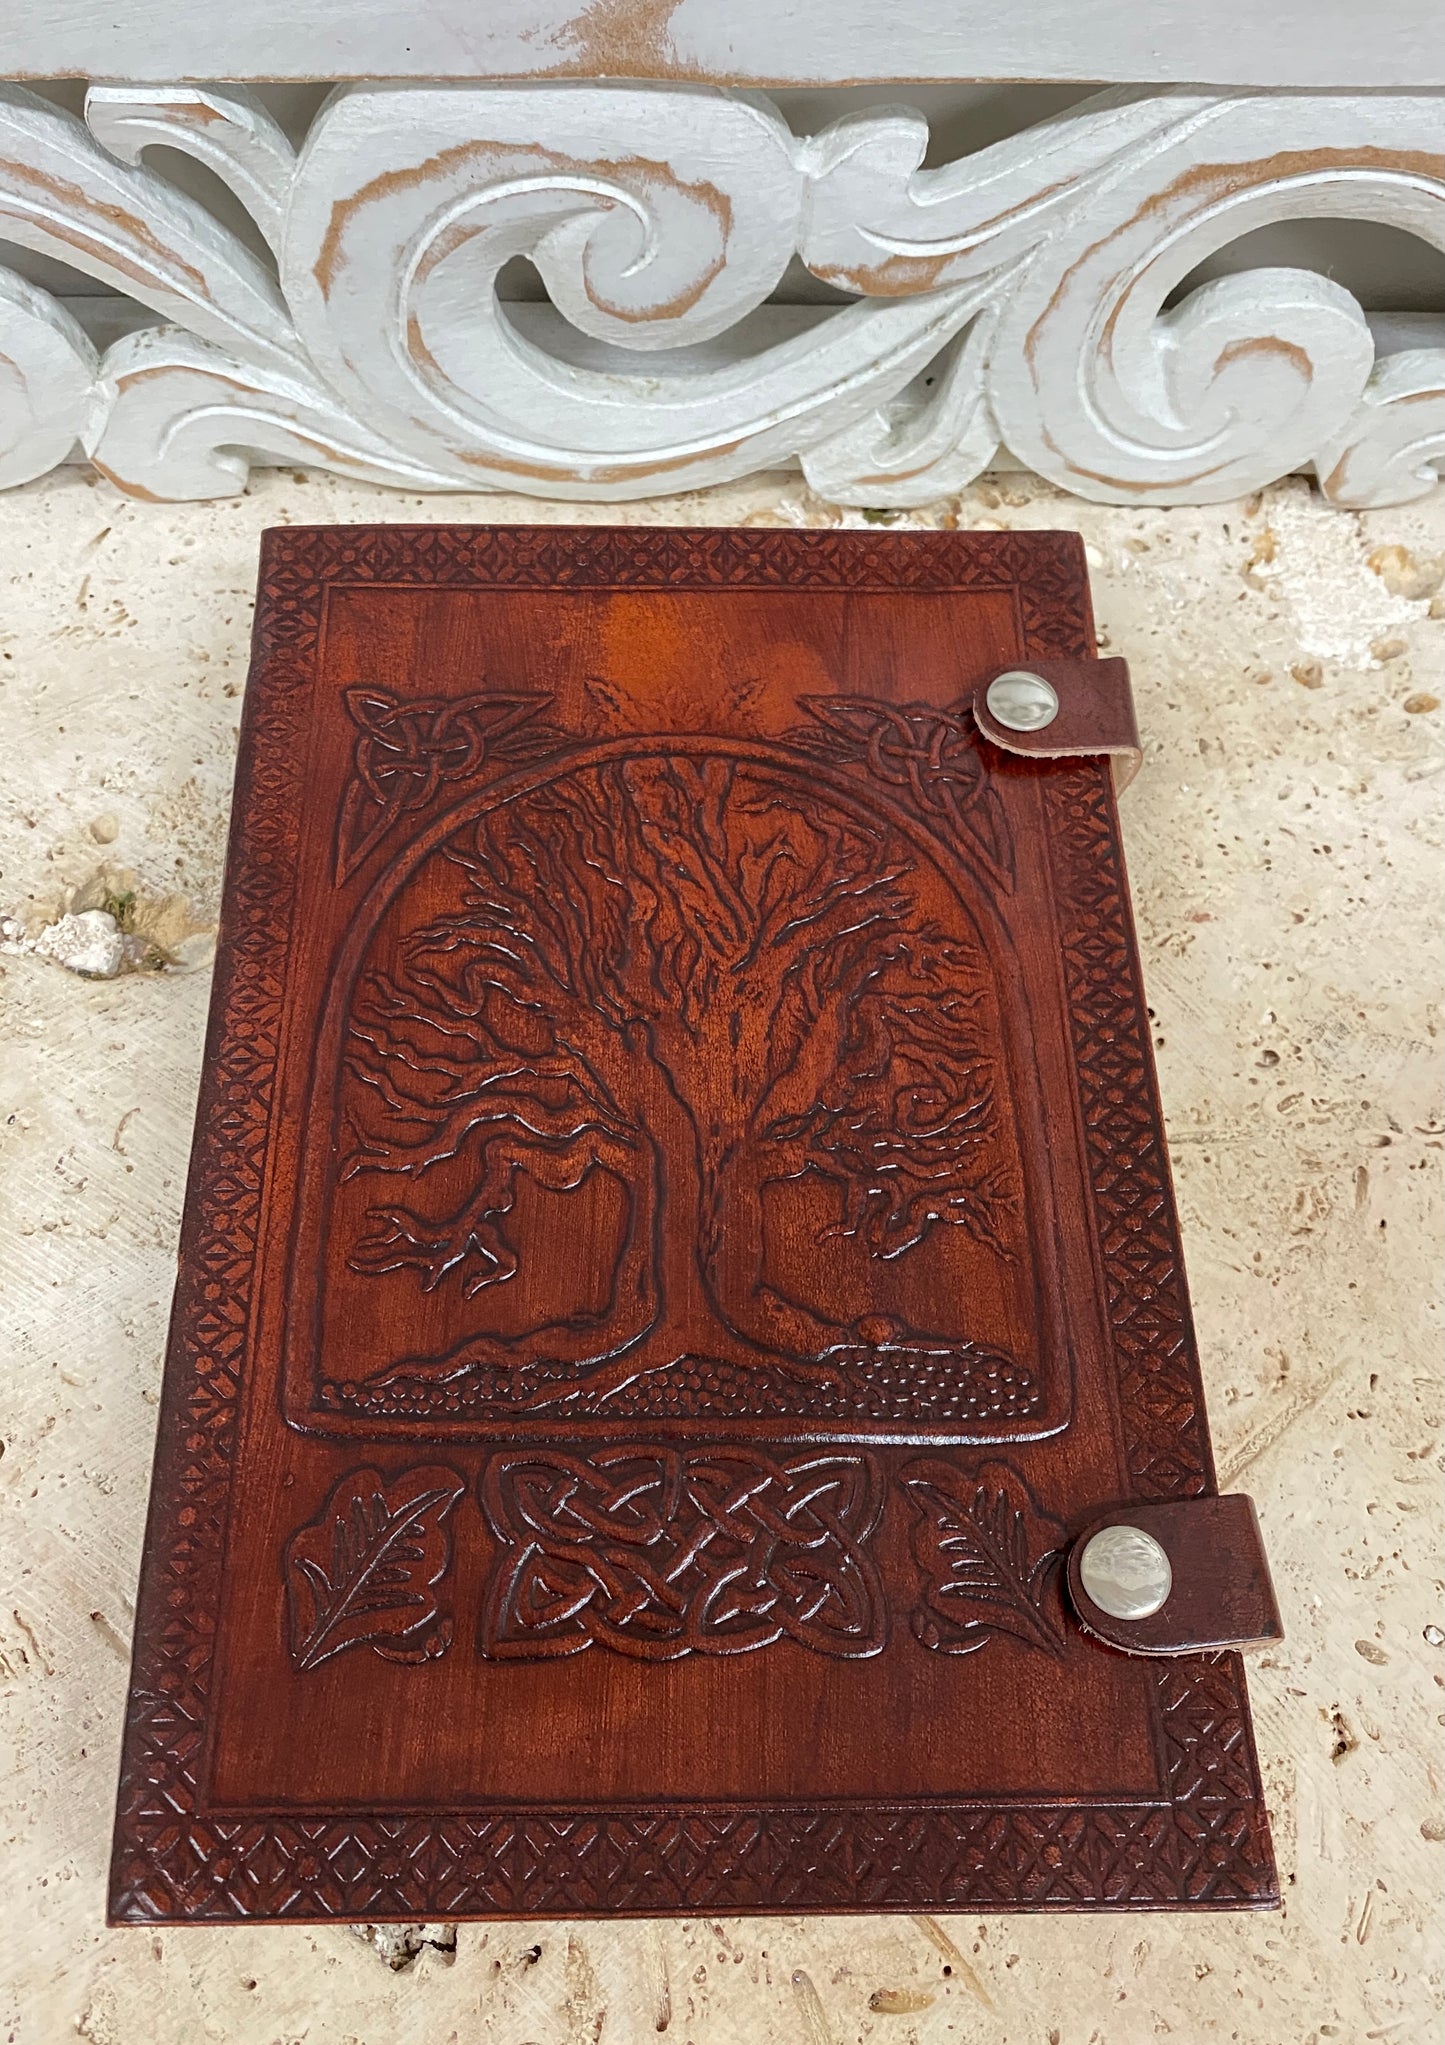 Hand Embossed Camel leather Journal with Button Clasp - 6" x 9" x 1"